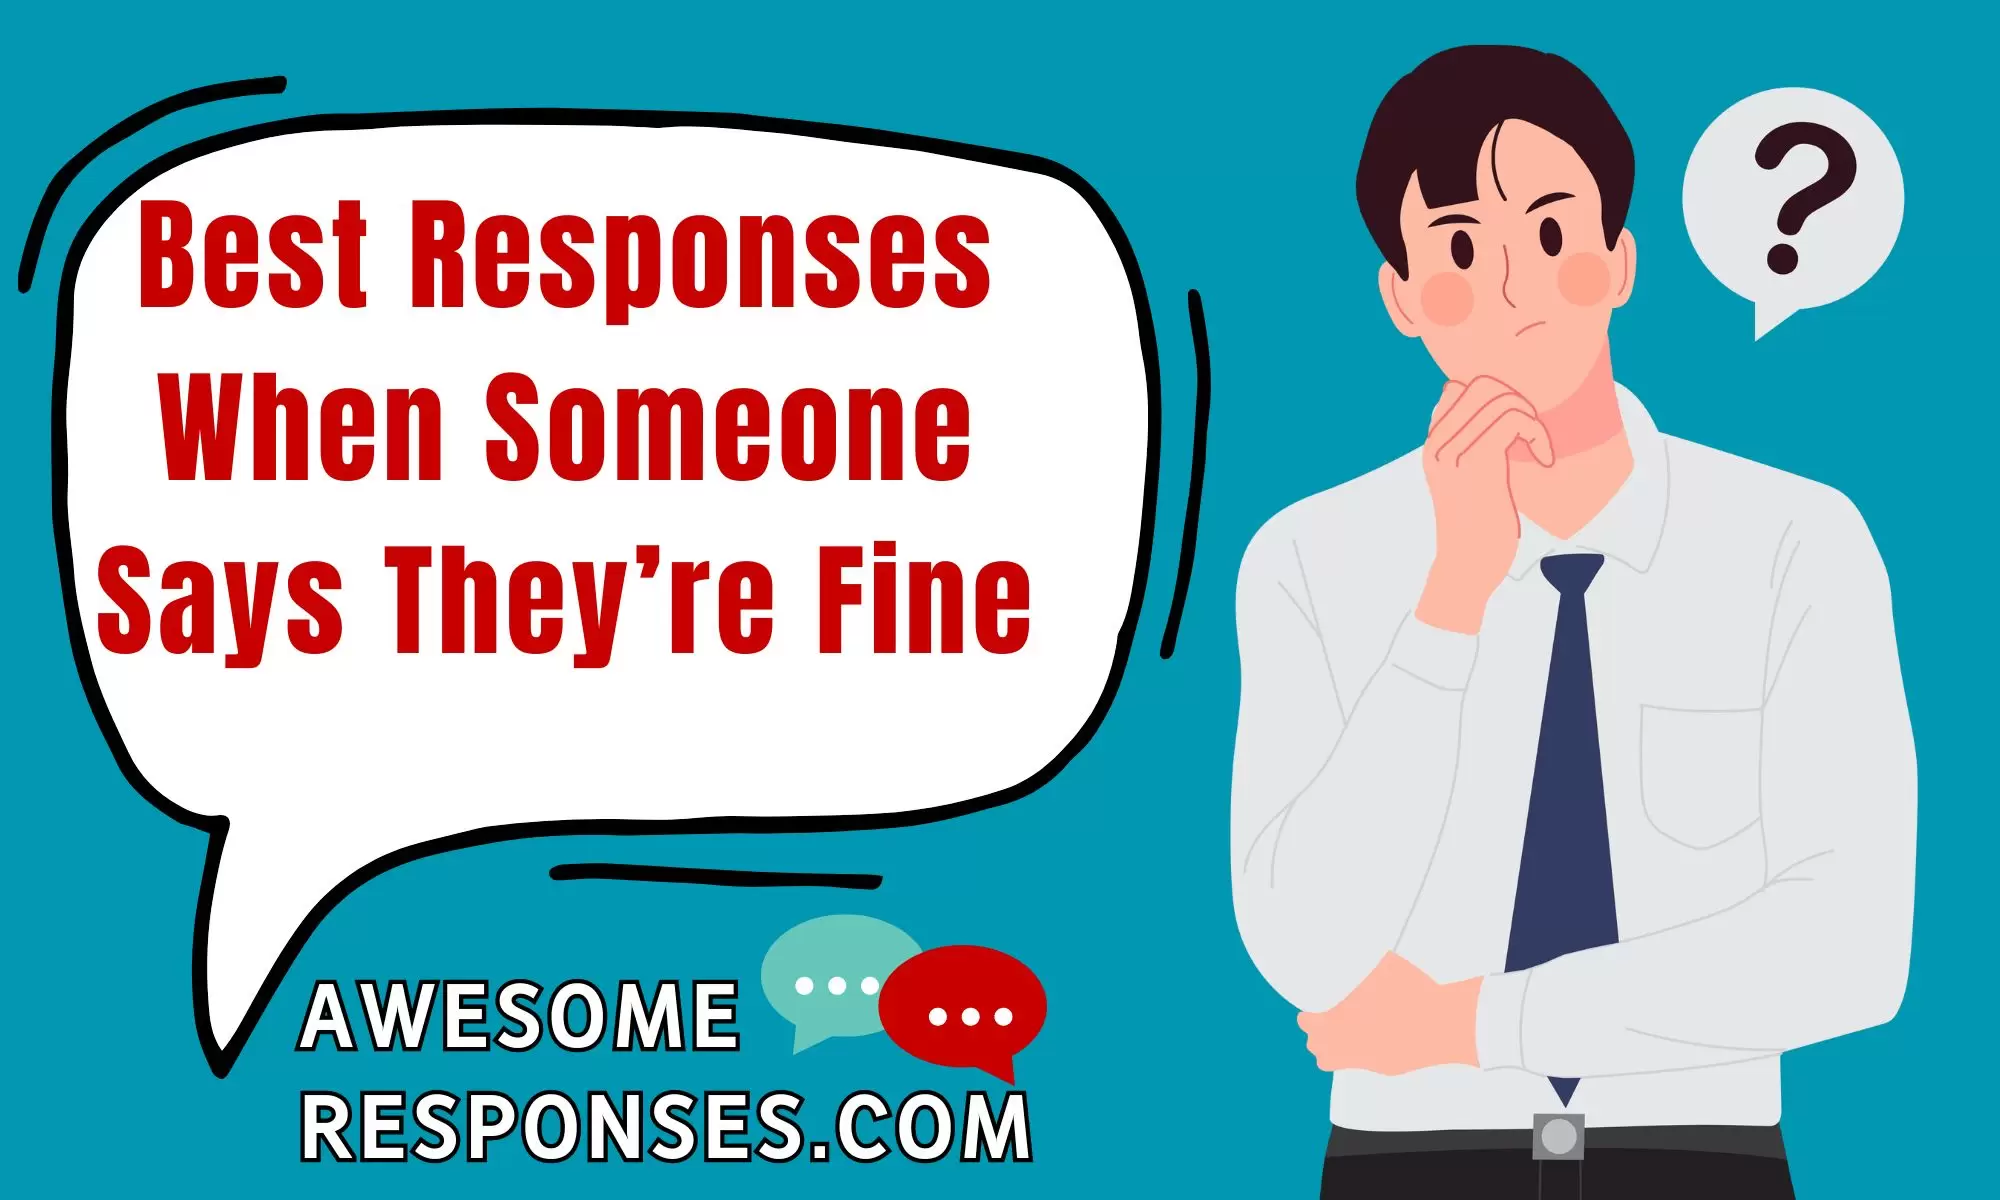 Best Responses When Someone Says They’re Fine